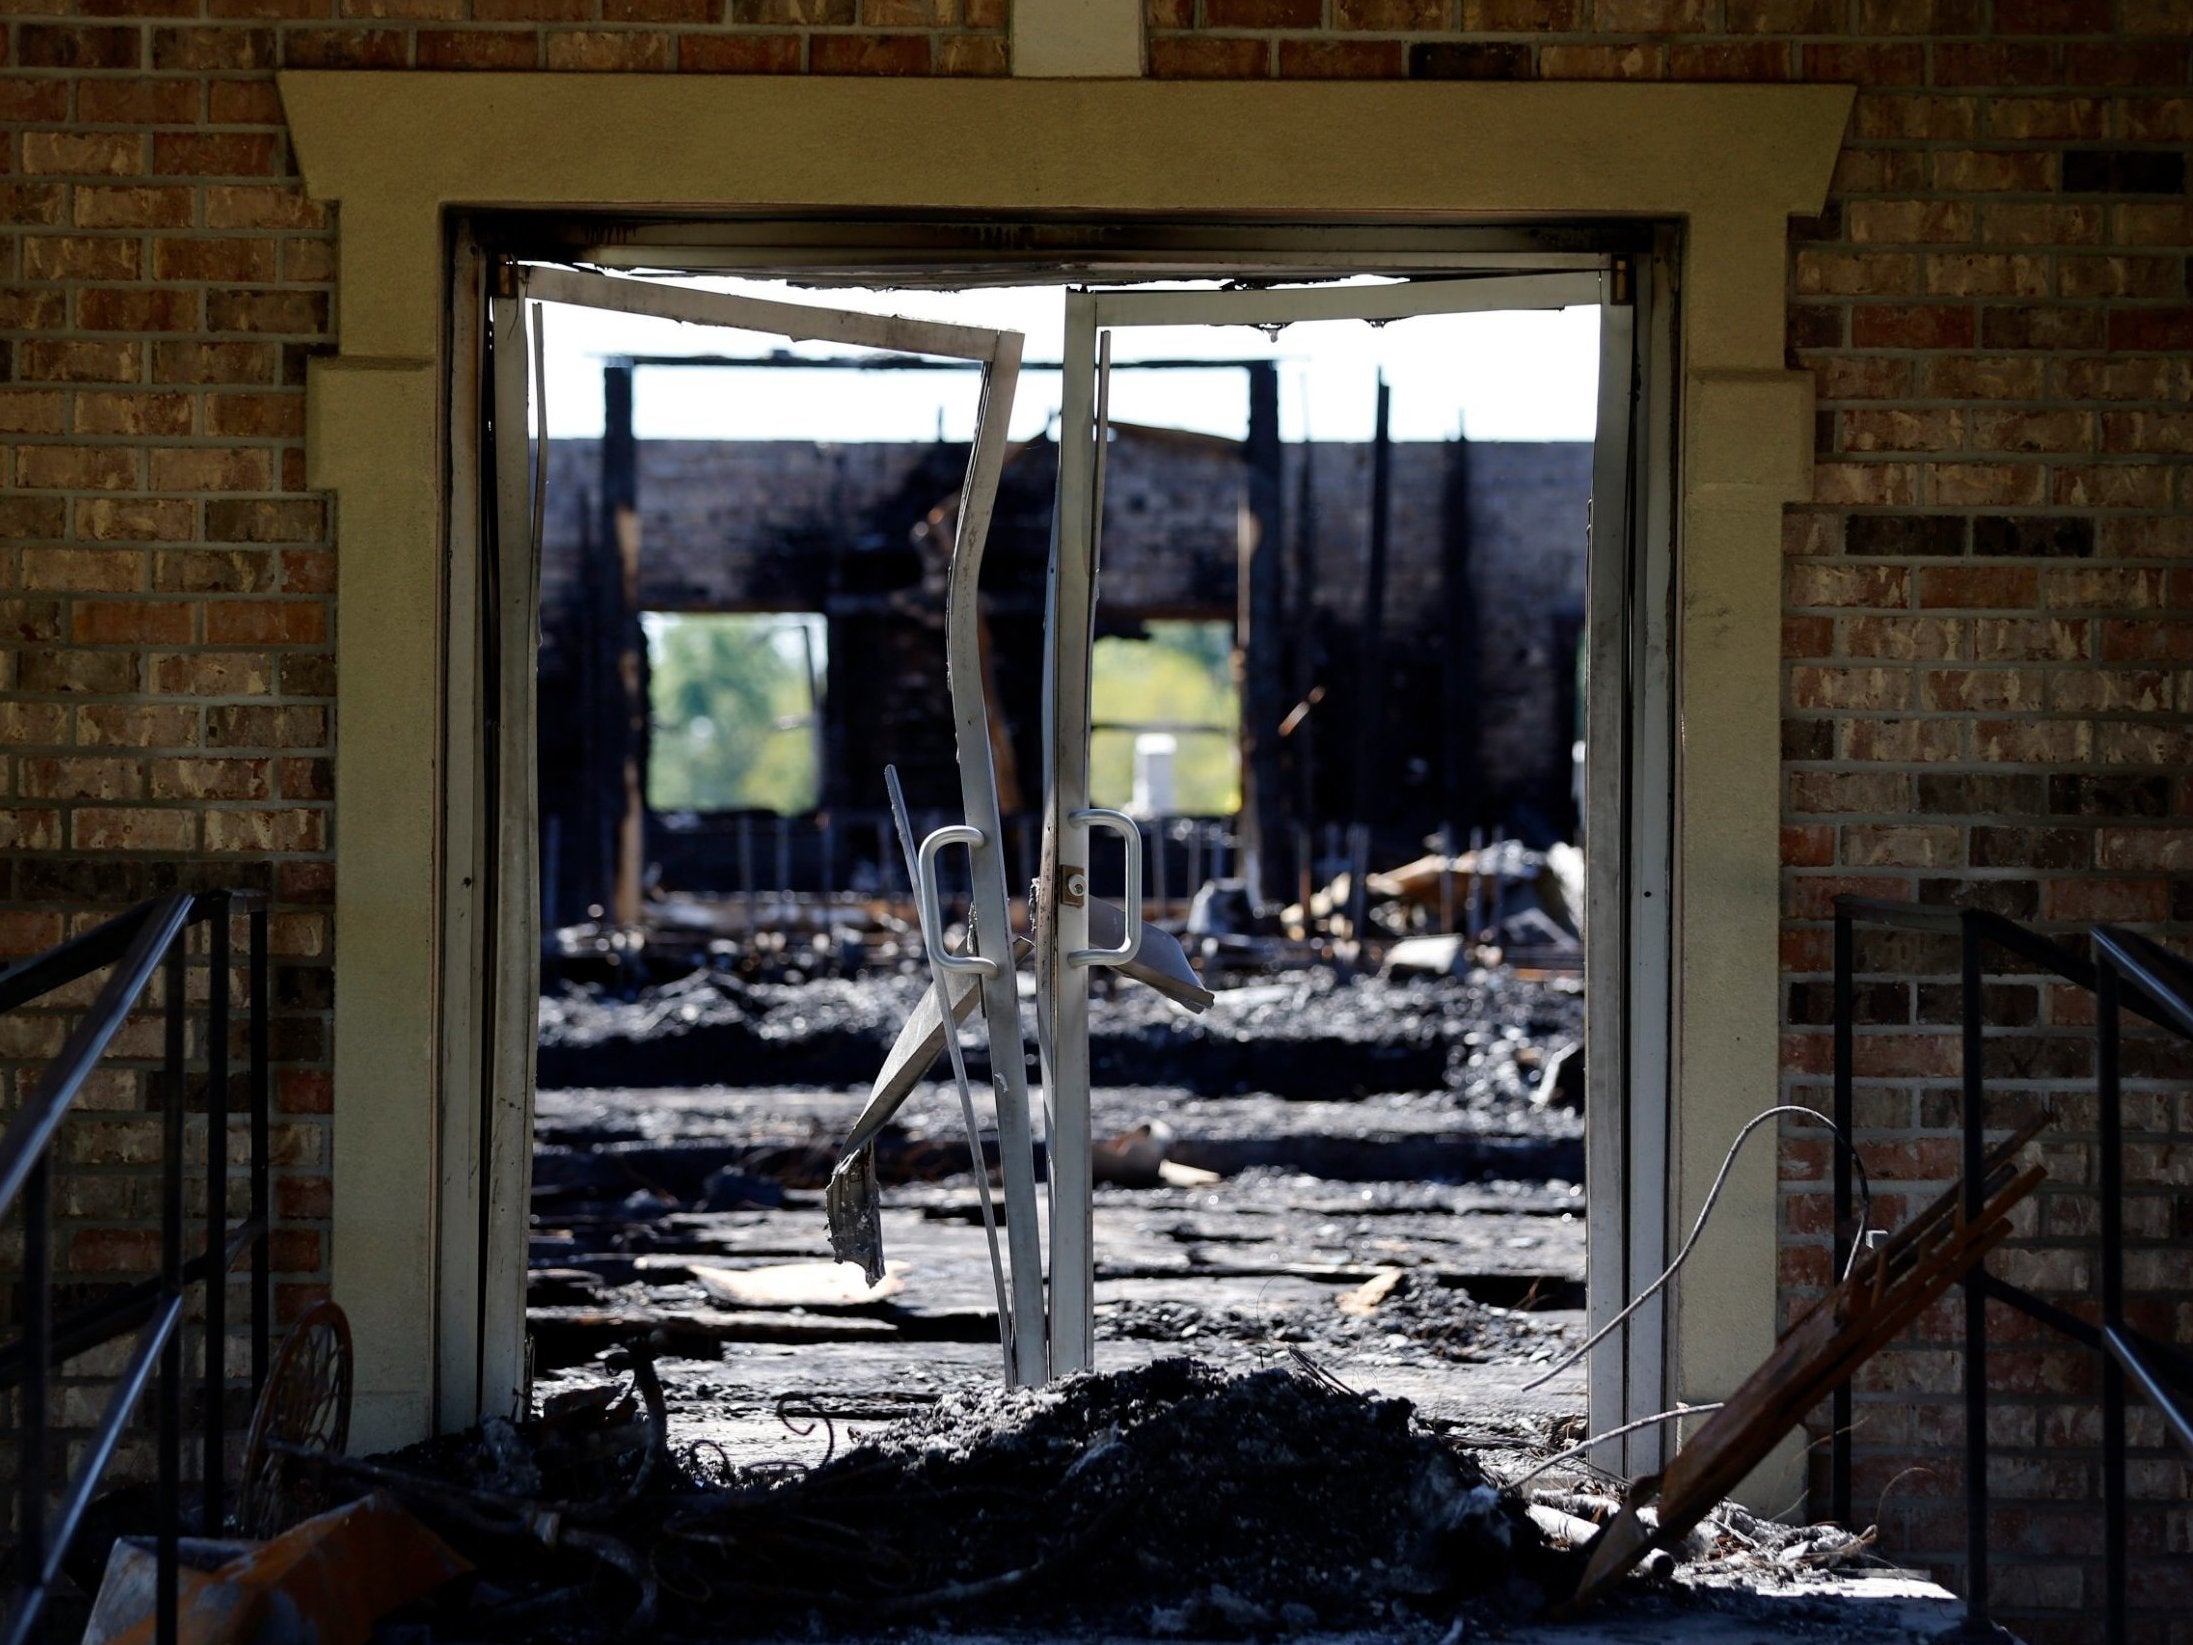 Picture taken Wednesday 10 April 2019 of burnt ruins of the Greater Union Baptist Church, one of three that recently burned down in St. Landry Parish, Opelousas, Lousiana, US.